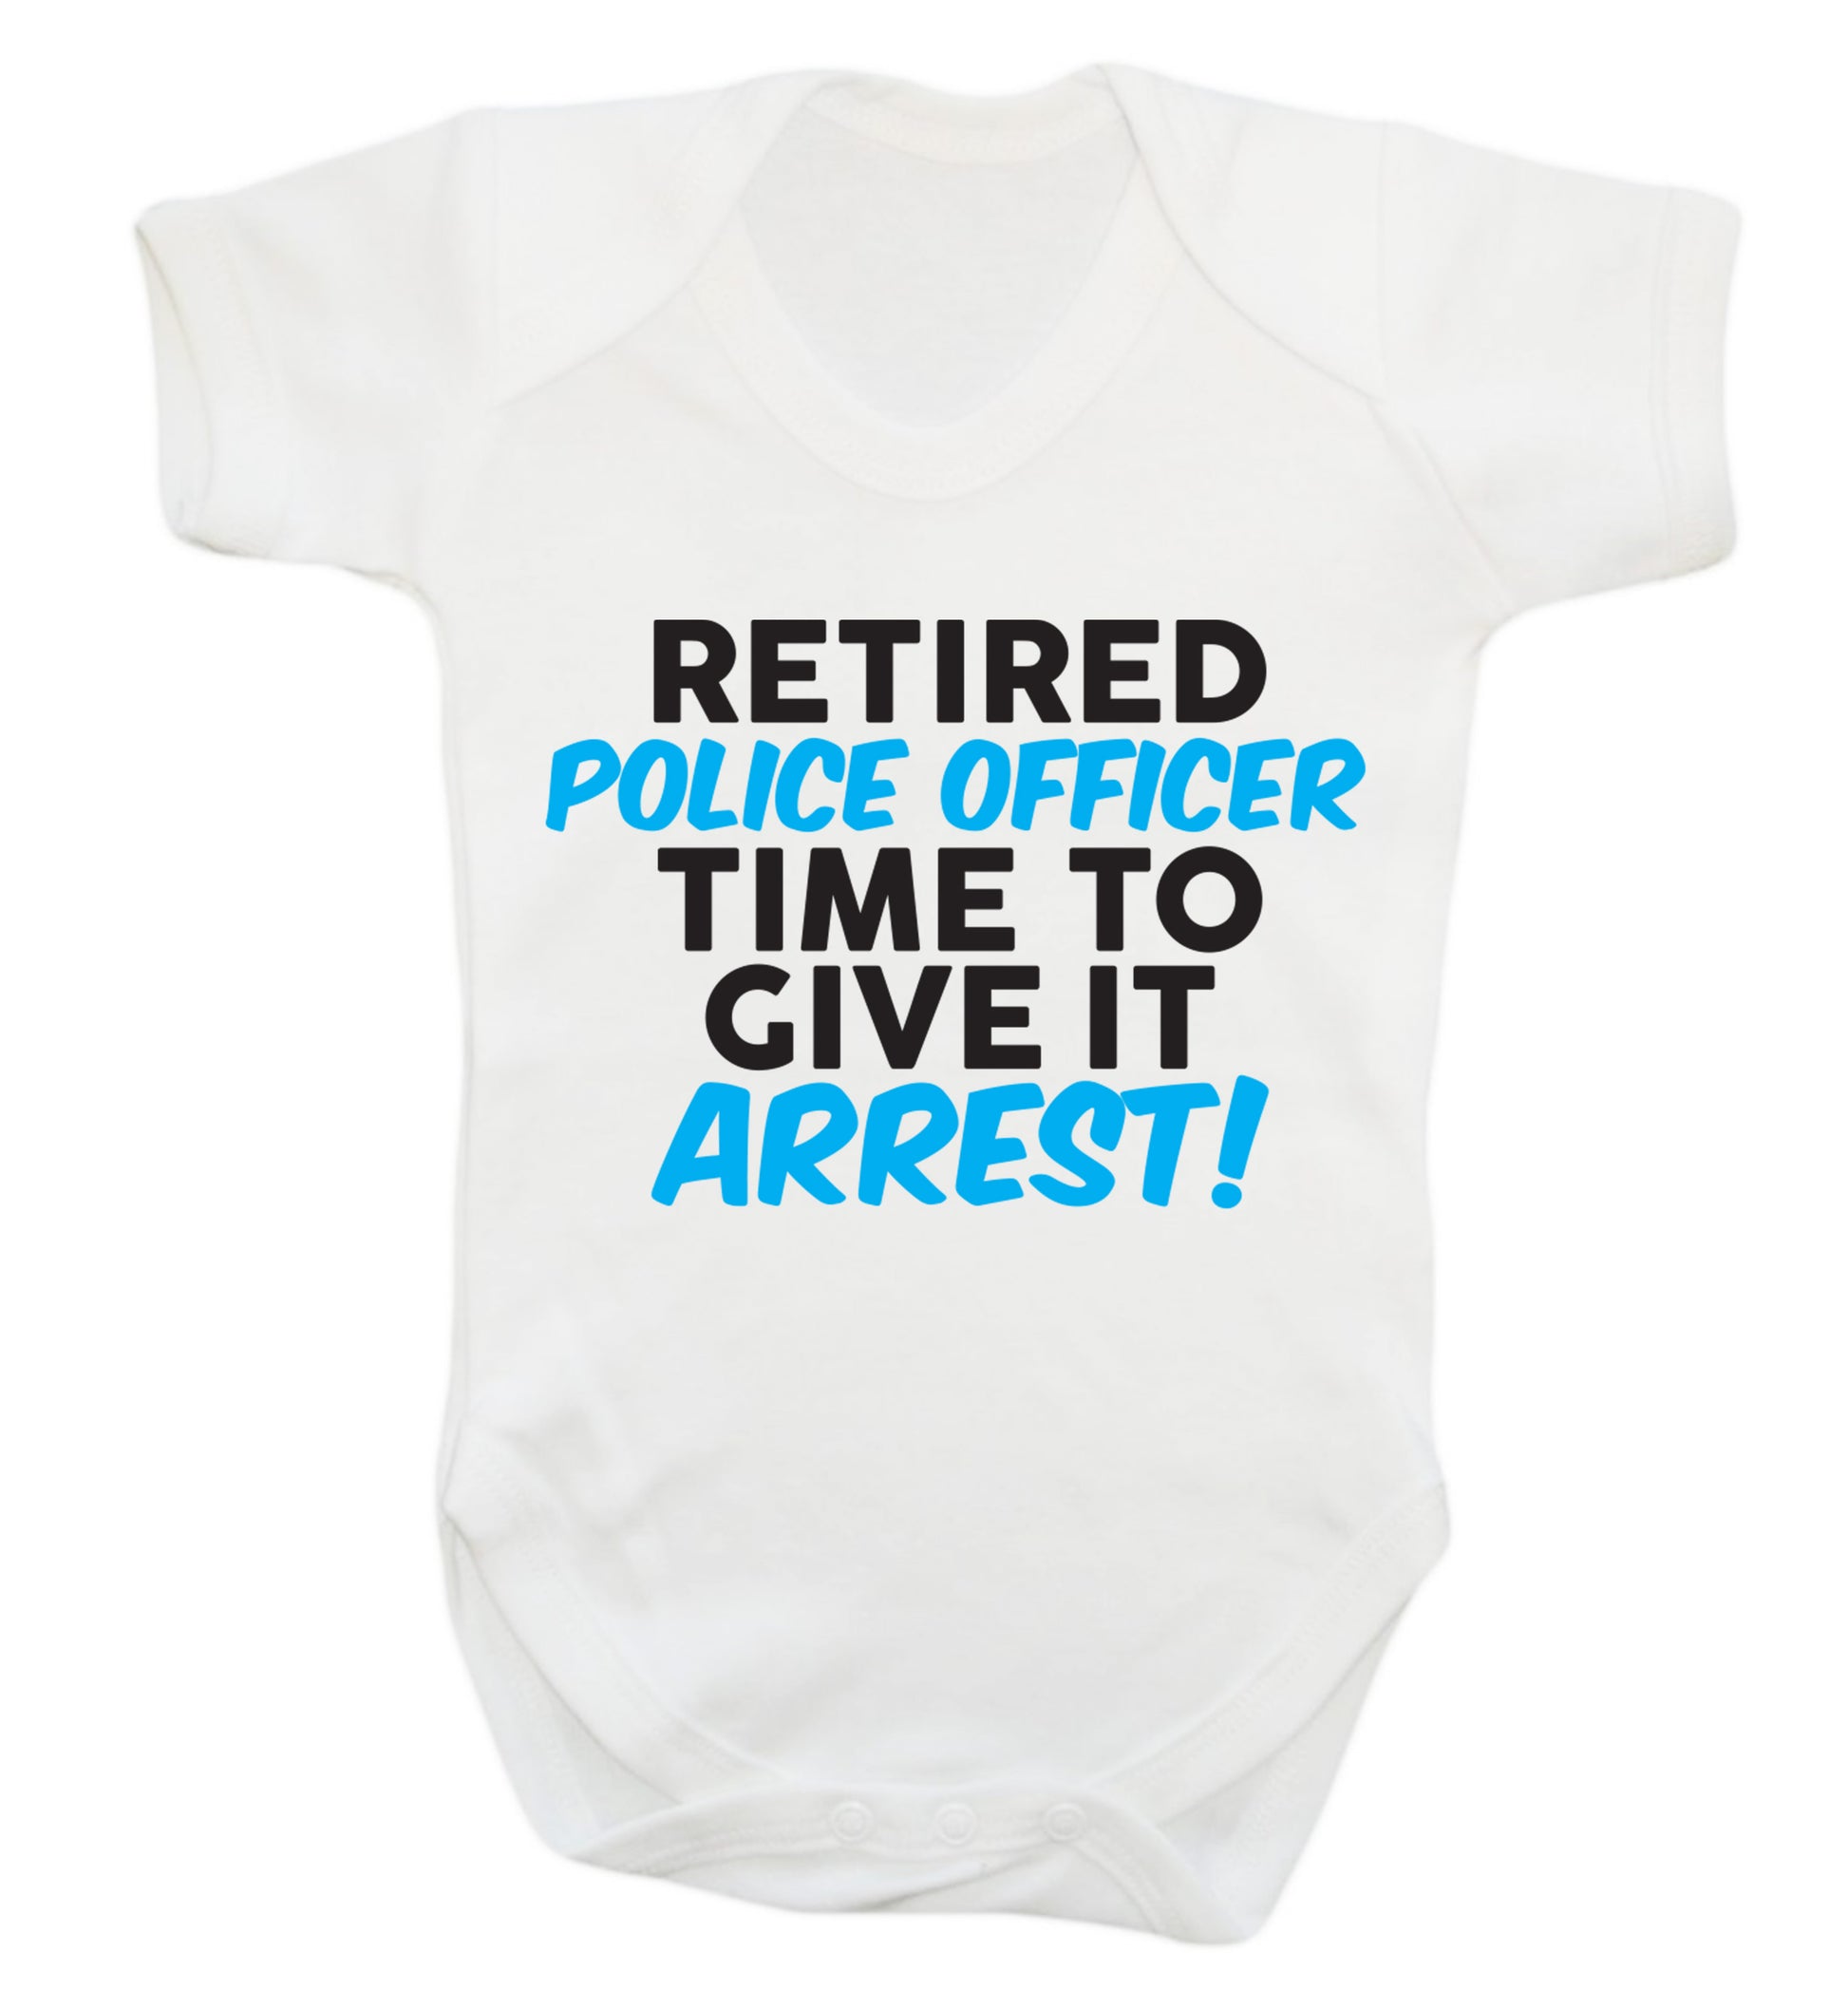 Retired police officer time to give it arrest Baby Vest white 18-24 months